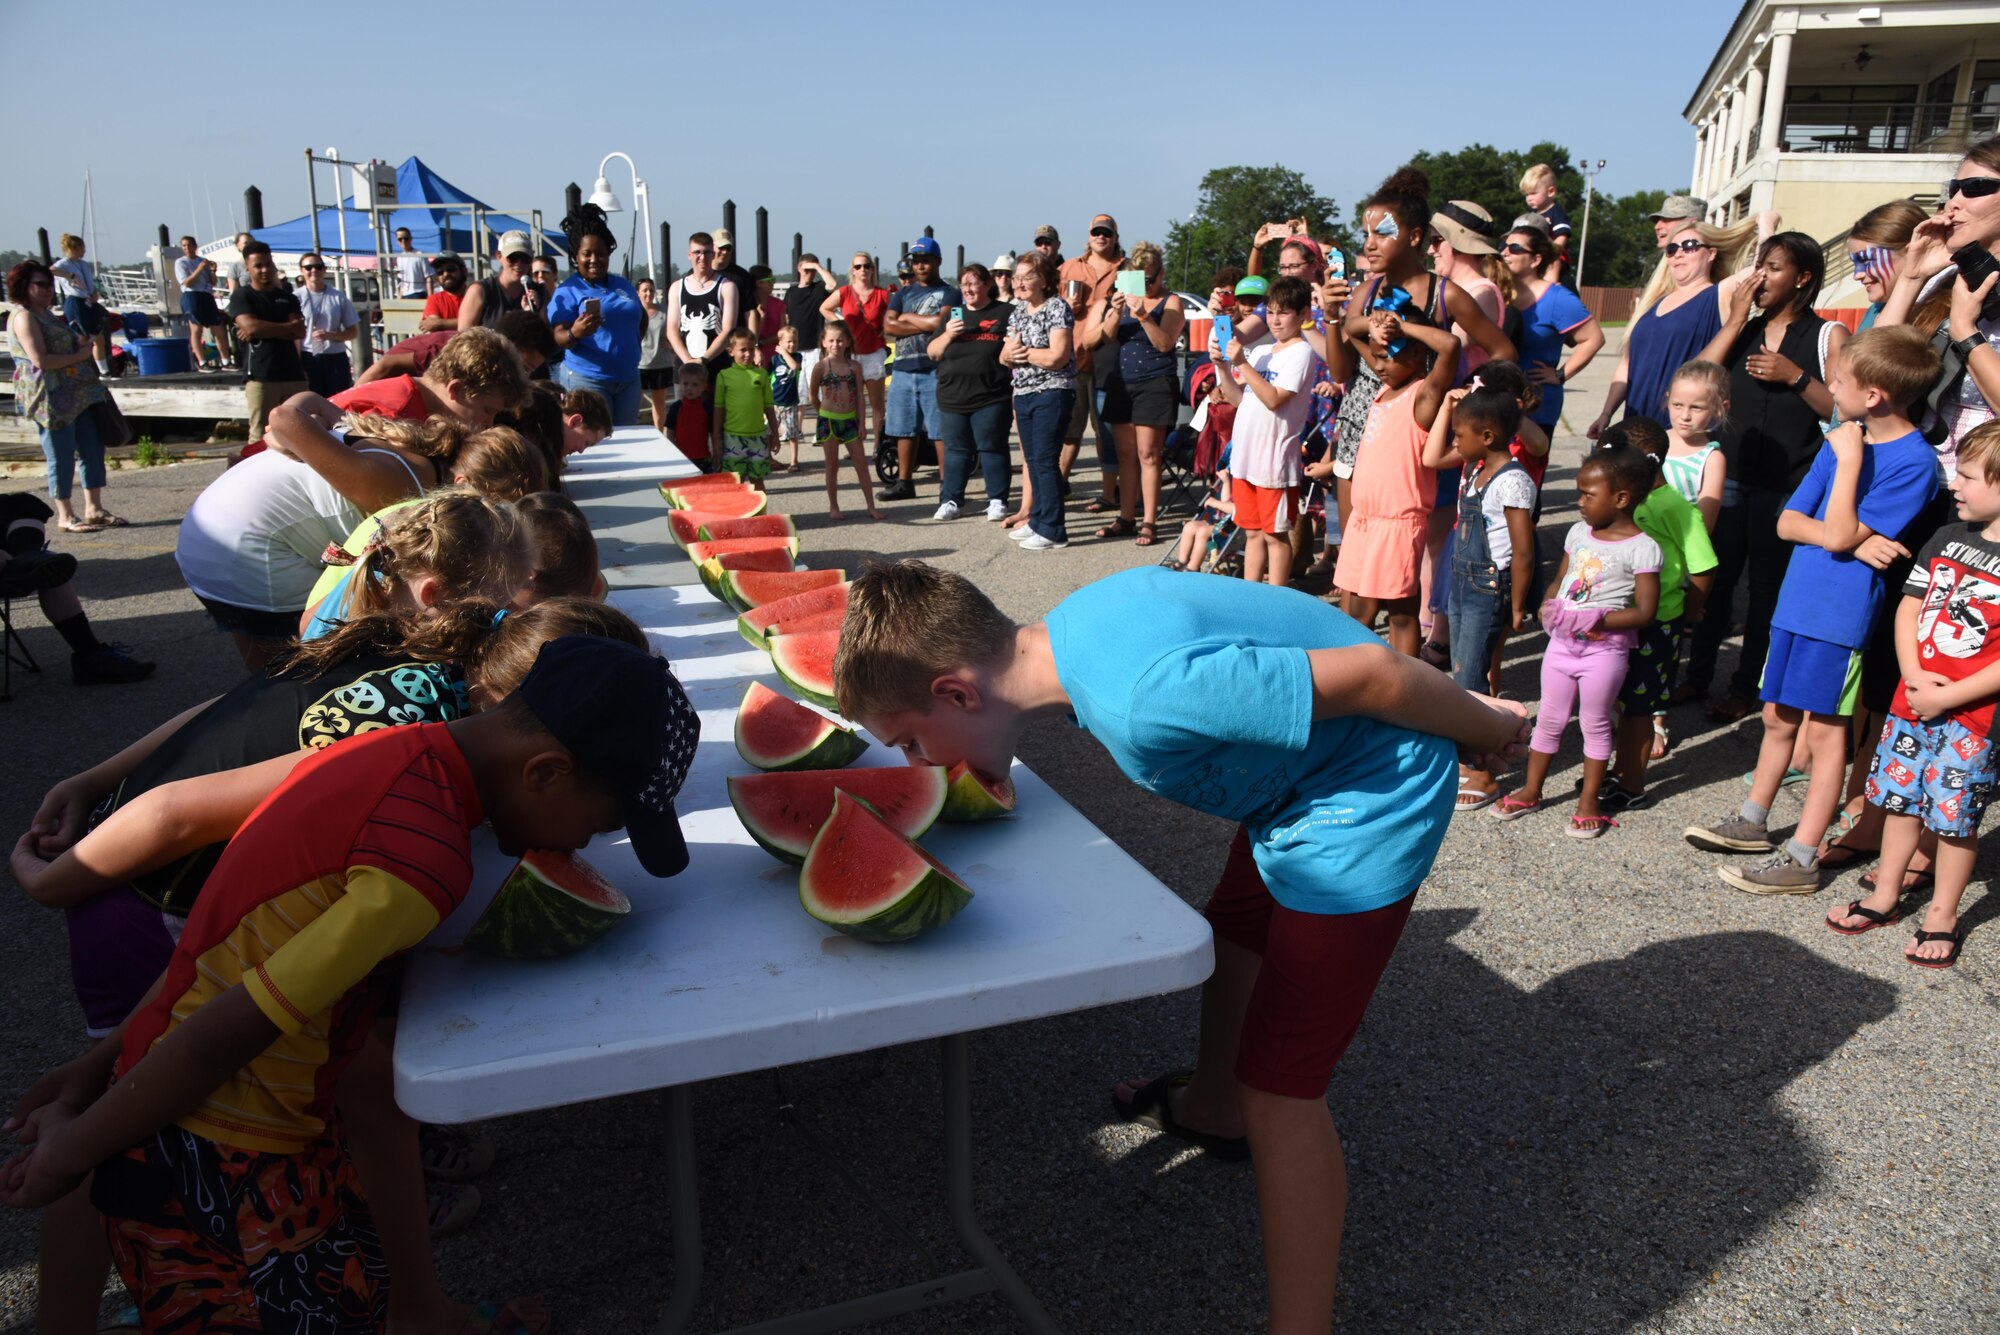 Keesler children participate in the watermelon eating competition during the Pops in the Park event at Marina Park July 1, 2017, on Keesler Air Force Base, Miss. The event also included a kids’ fishing rodeo, mullet toss, fireworks display and music performances. (U.S. Air Force photo by Kemberly Groue)